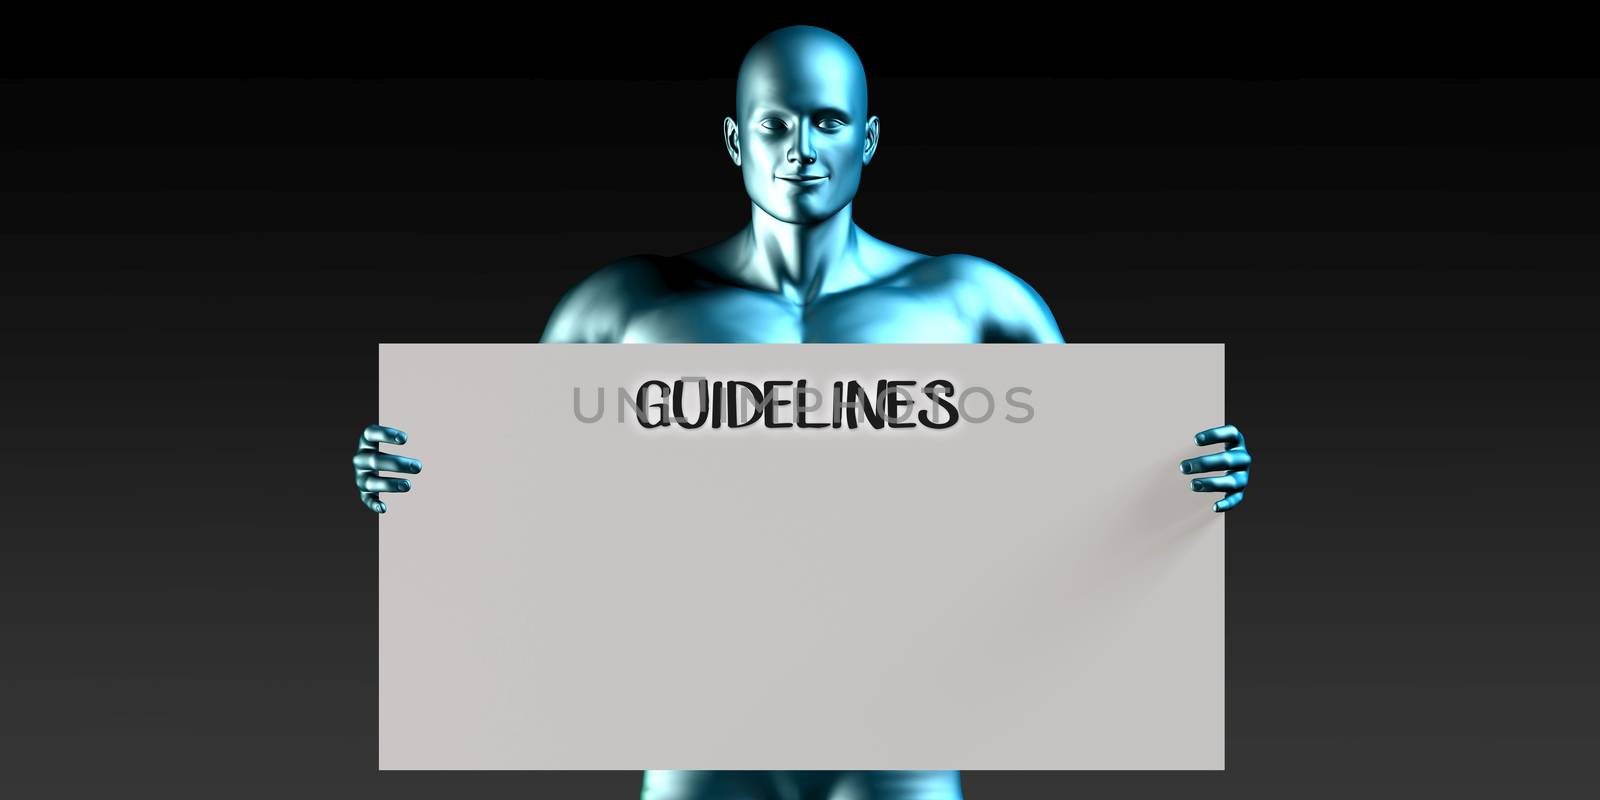 Guidelines by kentoh